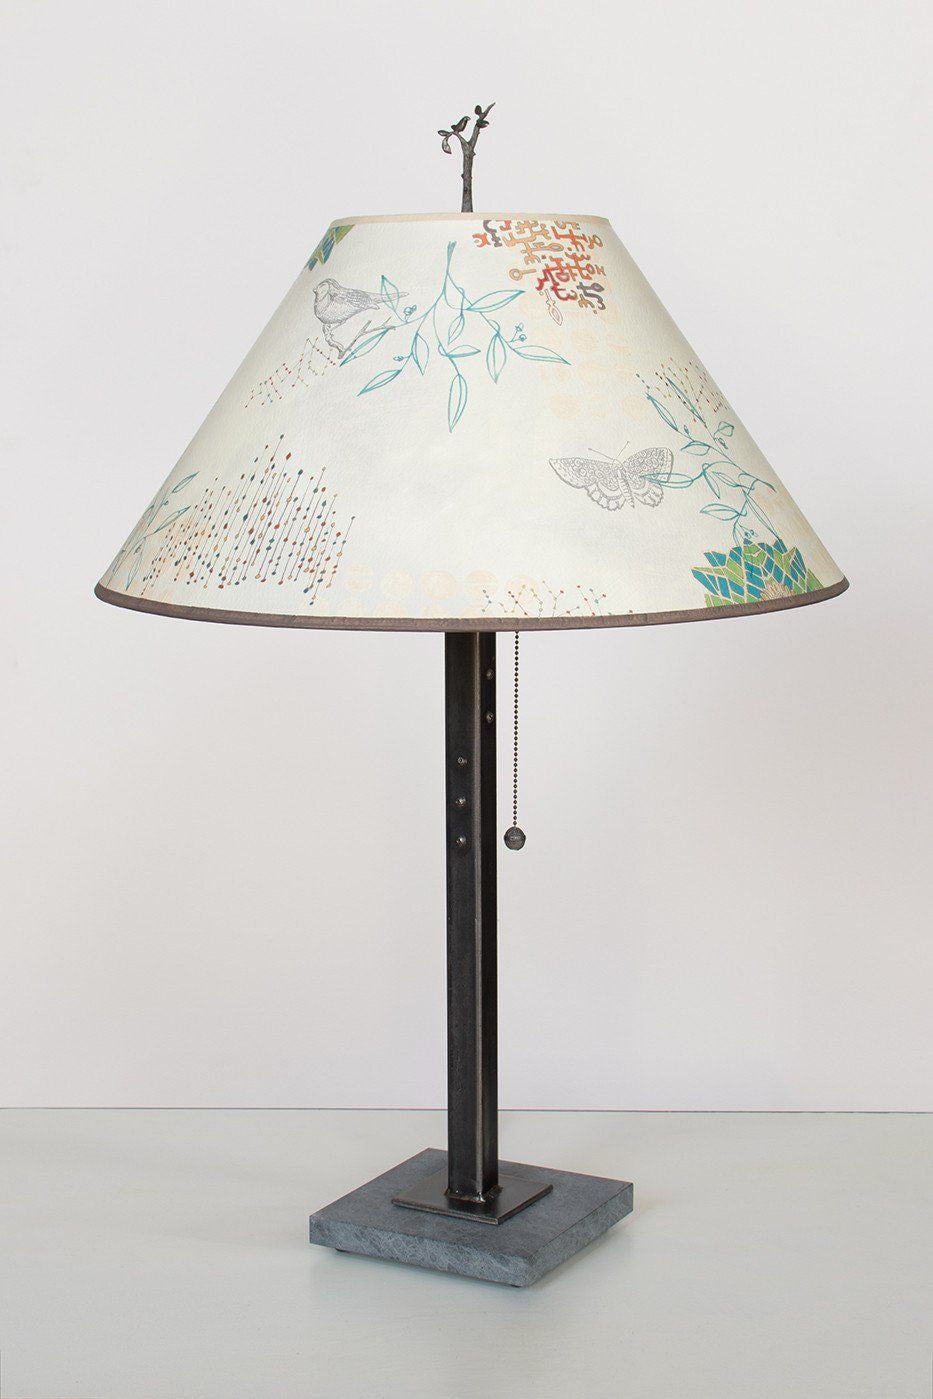 Janna Ugone &amp; Co Table Lamps Steel Table Lamp with Large Conical Shade in Ecru Journey